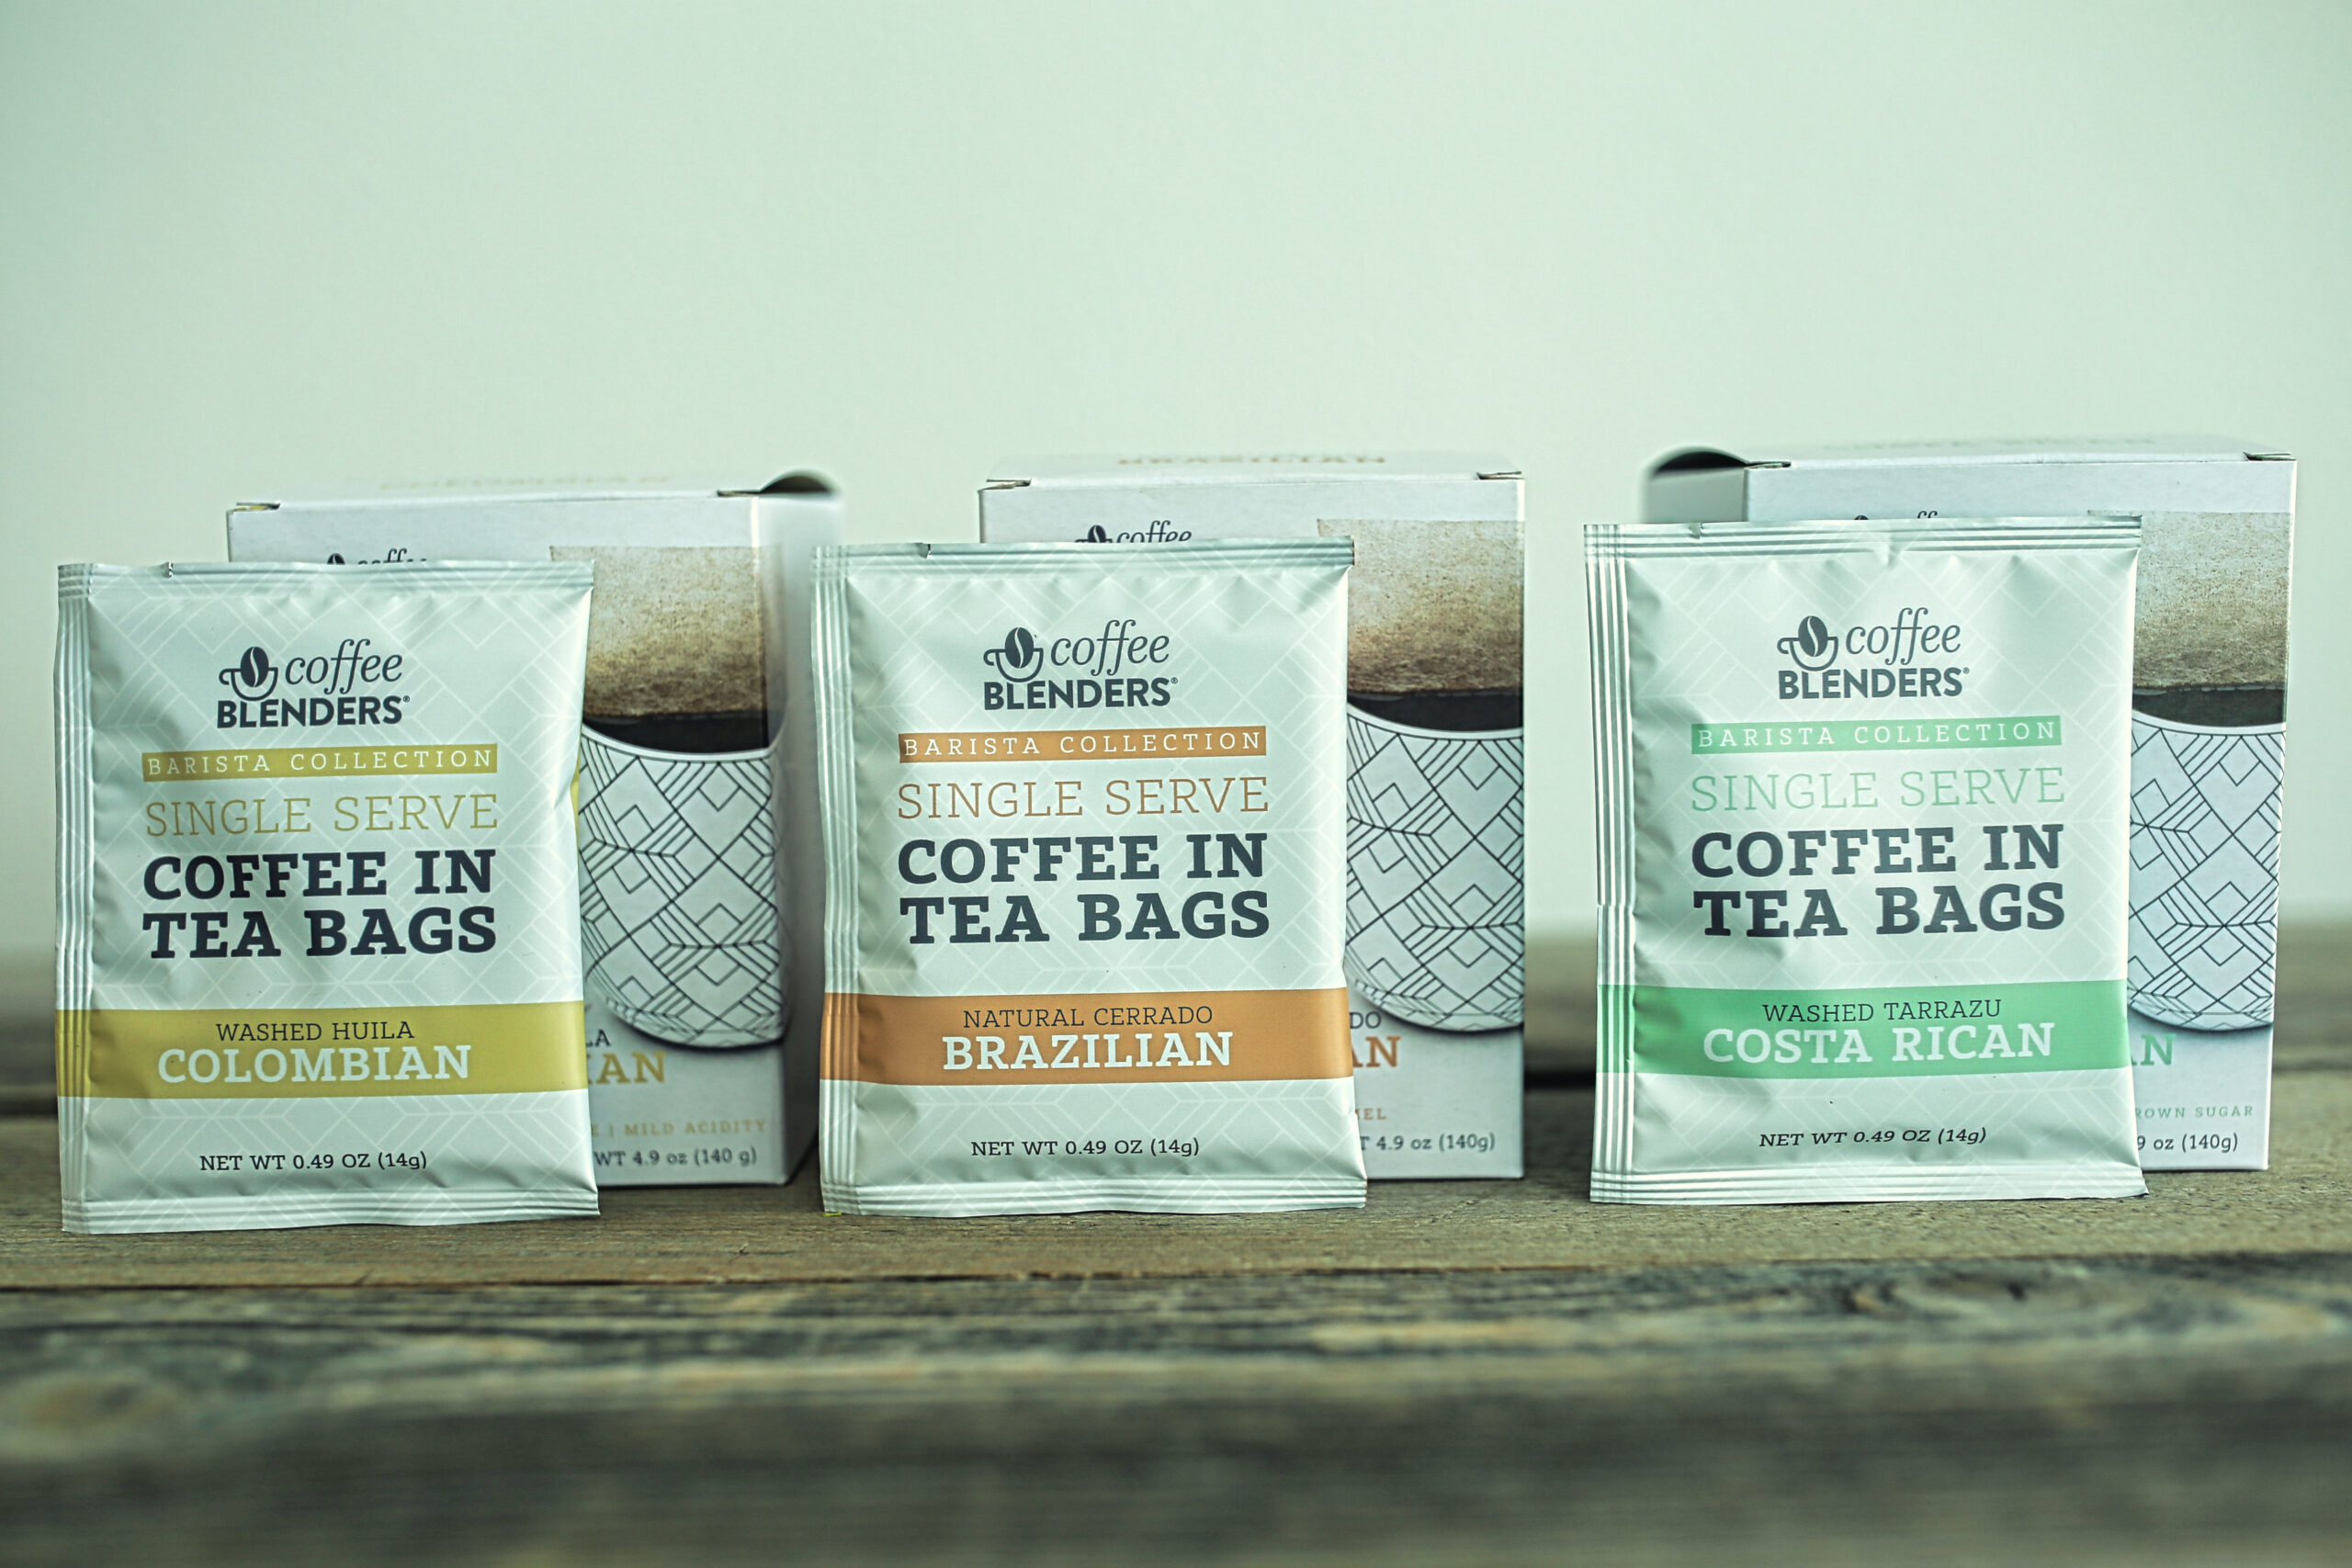 NuZee’s Compostable Tea Bag Style Coffees Featured in Store Magazine